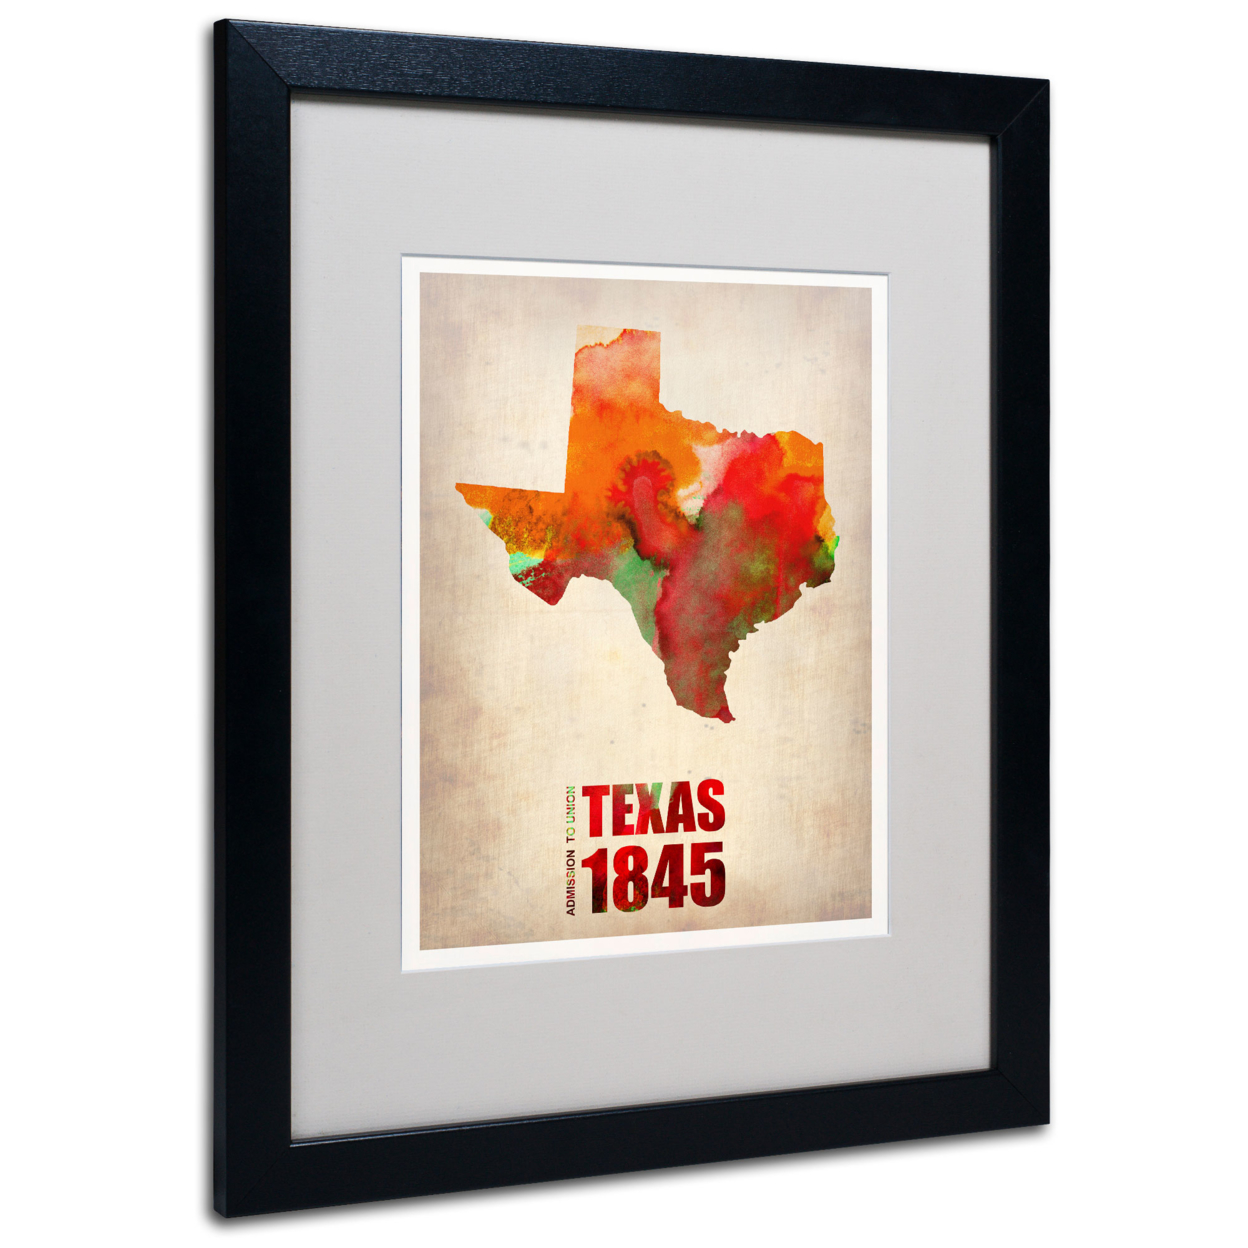 Naxart 'Texas Watercolor Map' Black Wooden Framed Art 18 X 22 Inches